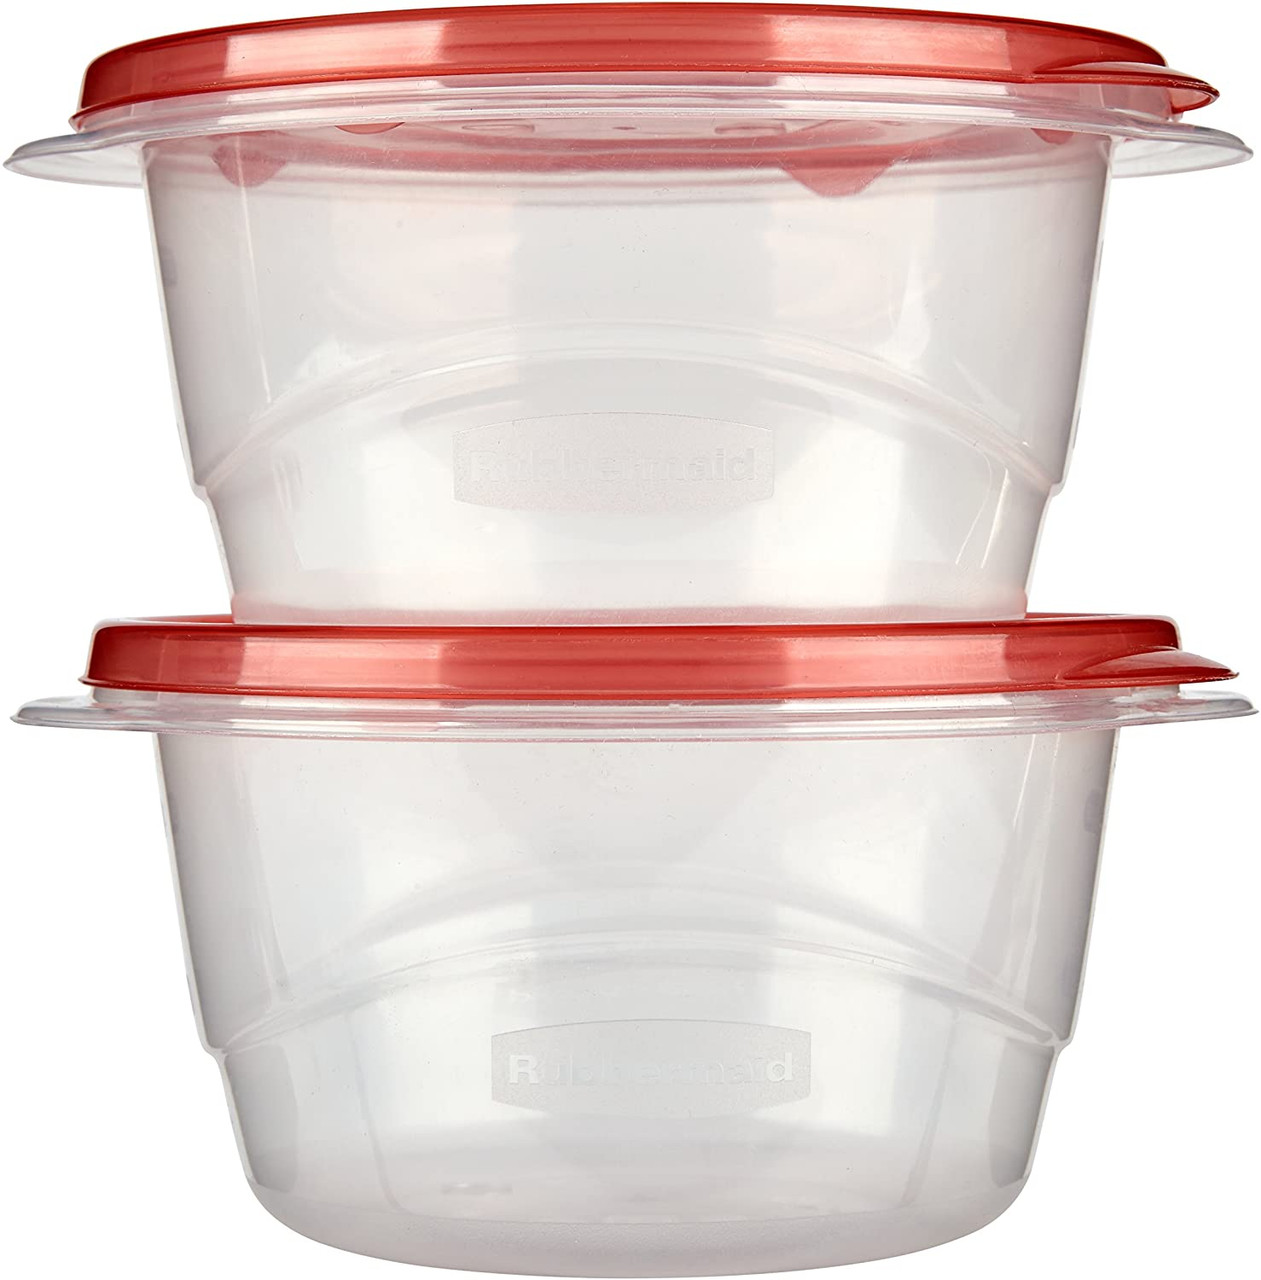 Rubbermaid Take Alongs Containers + Lids, Medium Bowls, 6.2 Cups - 3 bowls